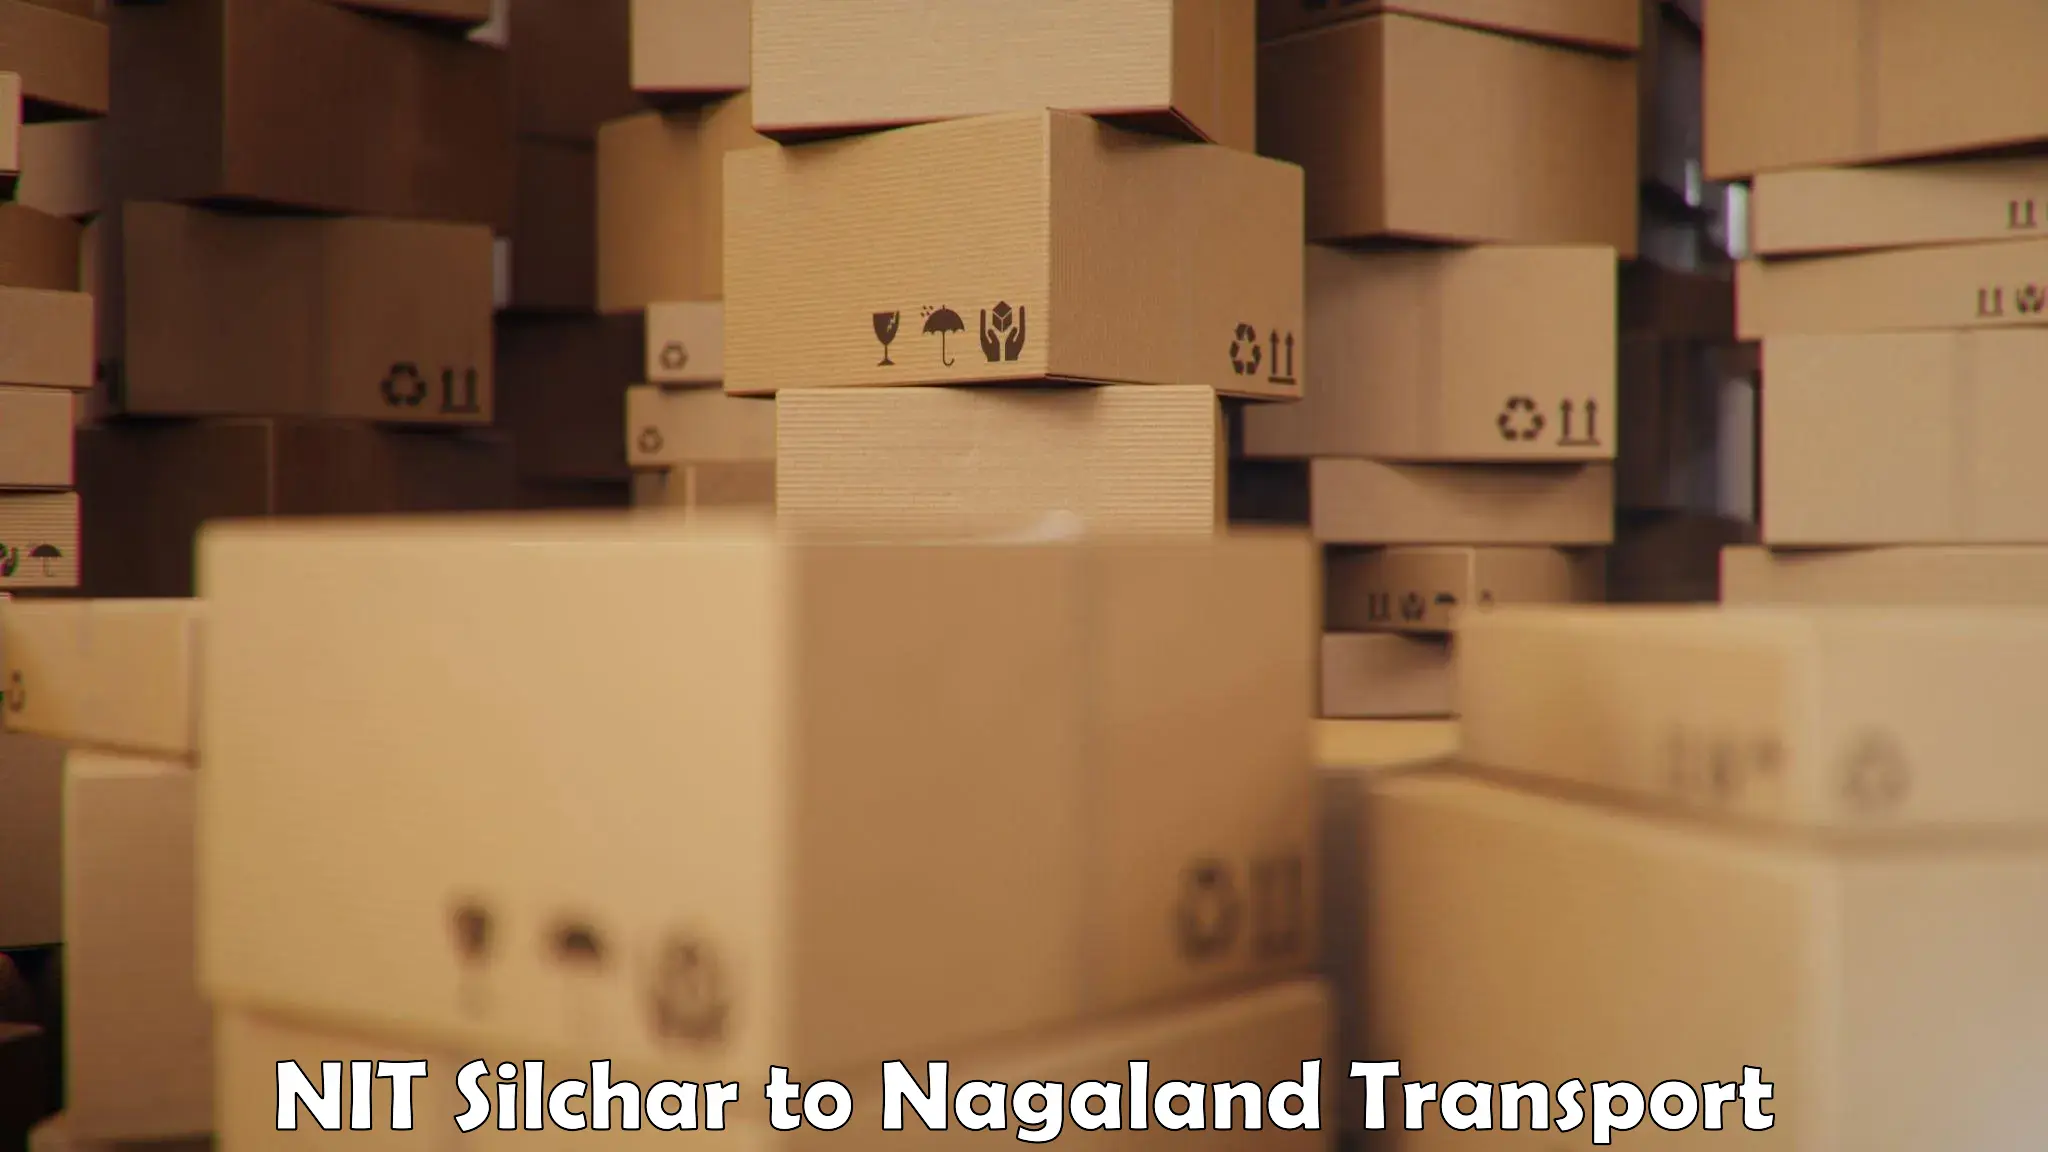 Container transport service NIT Silchar to Chumukedima